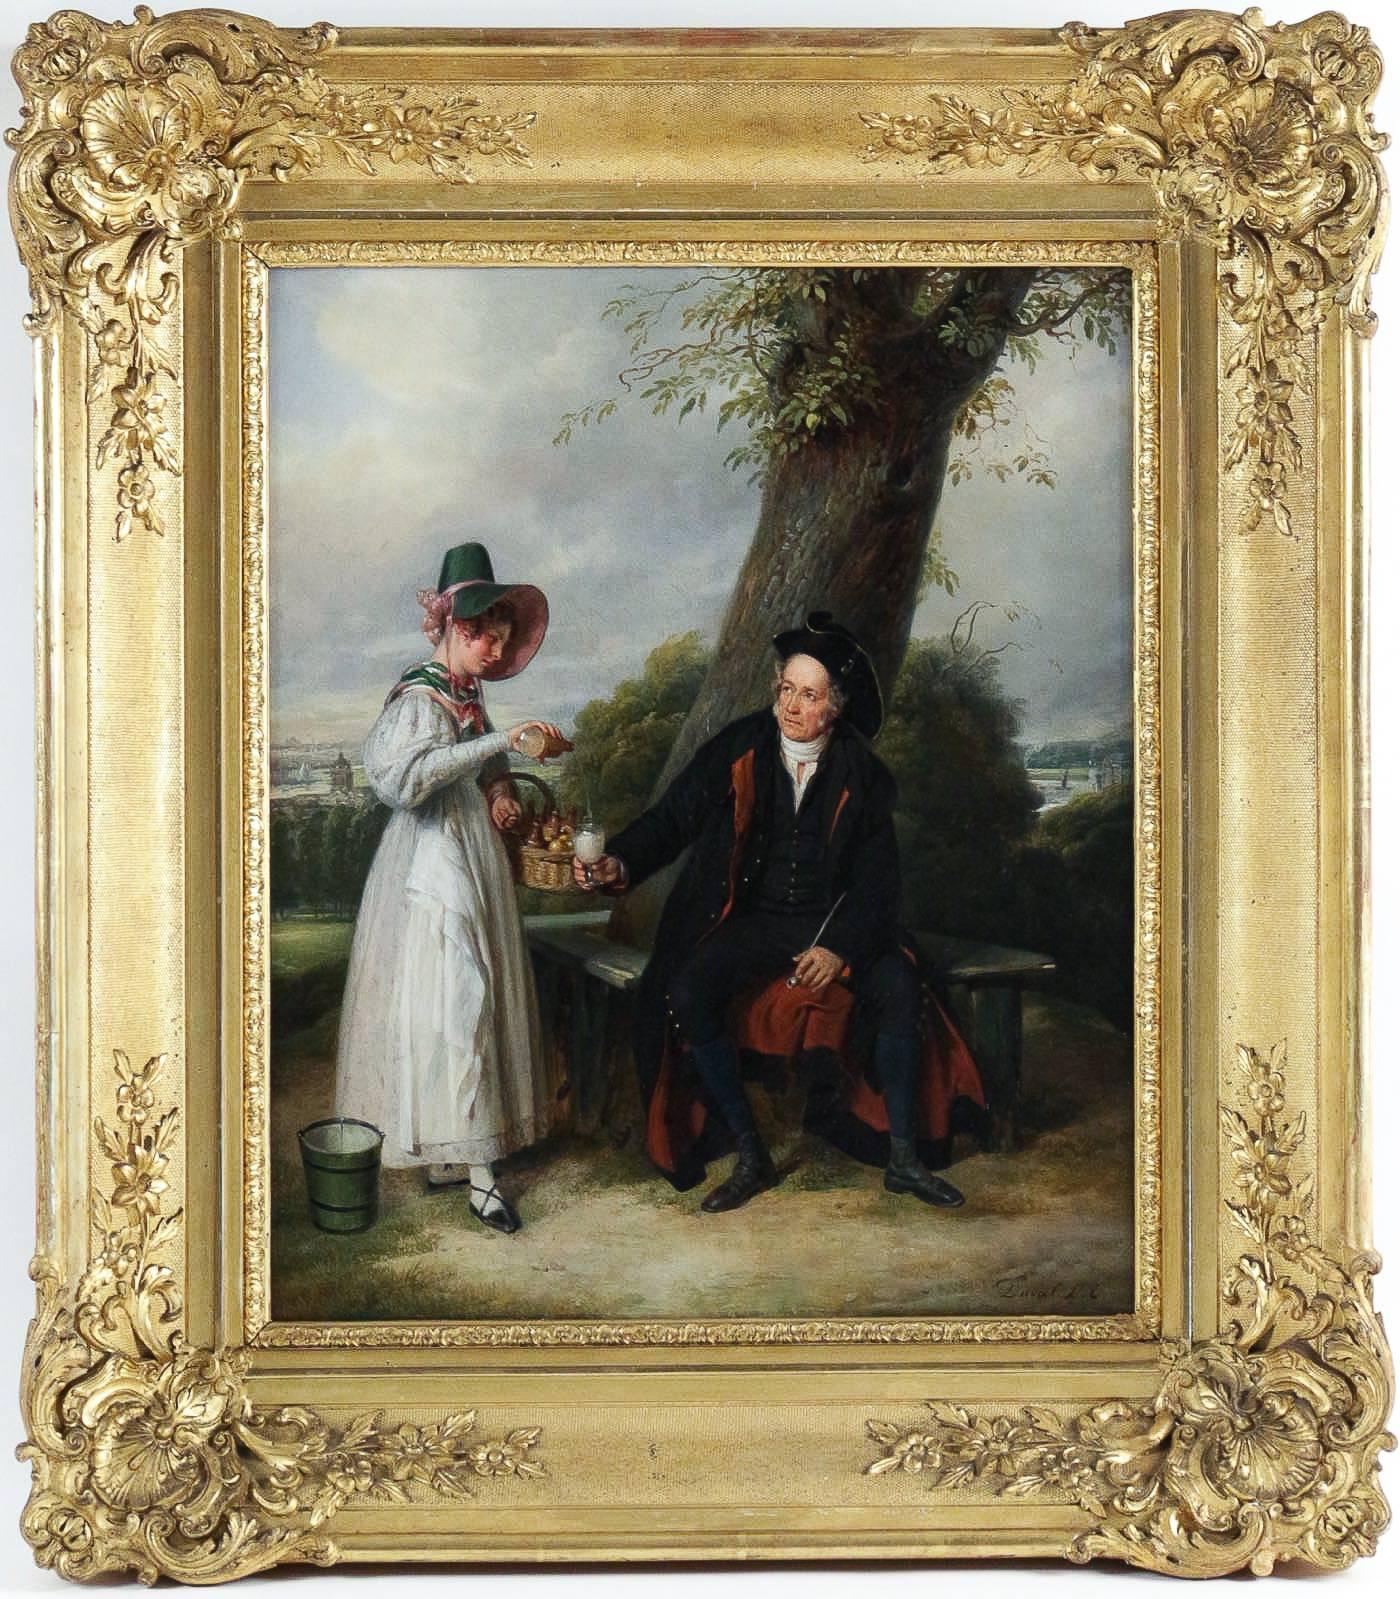 We are pleased to present you, an excellent, beautiful and very decorative oil on canvas depicting The Conversation between a Father and His Daughter.
Our painting is signed in the lower right by Pierre Duval le Camus,

early 19th century, French